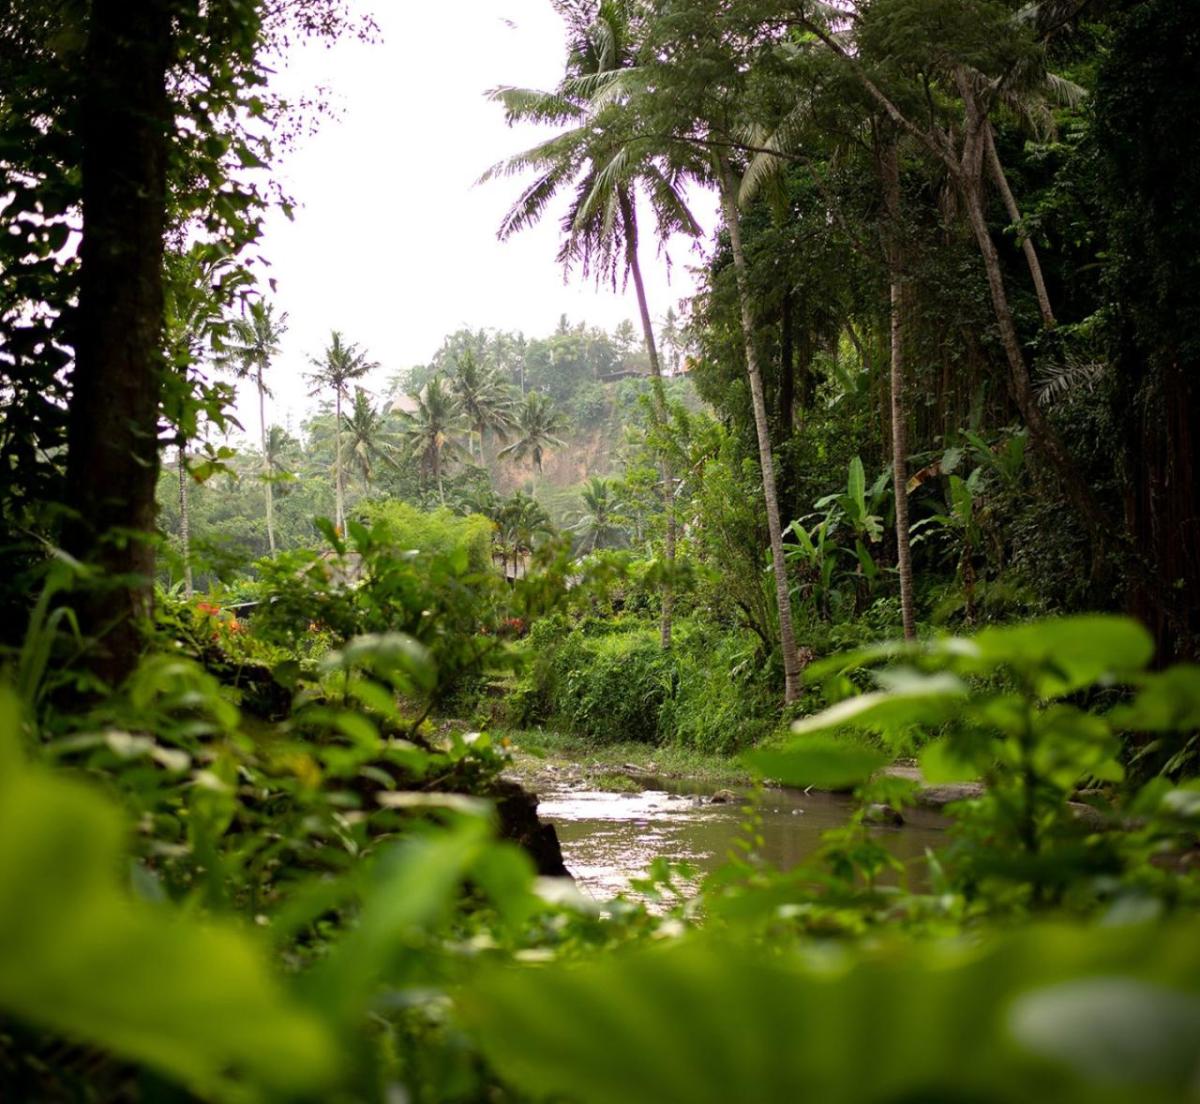 Carbon finance is enabling the long-term protection of the Alto Huayabamba concession by supporting local livelihoods.